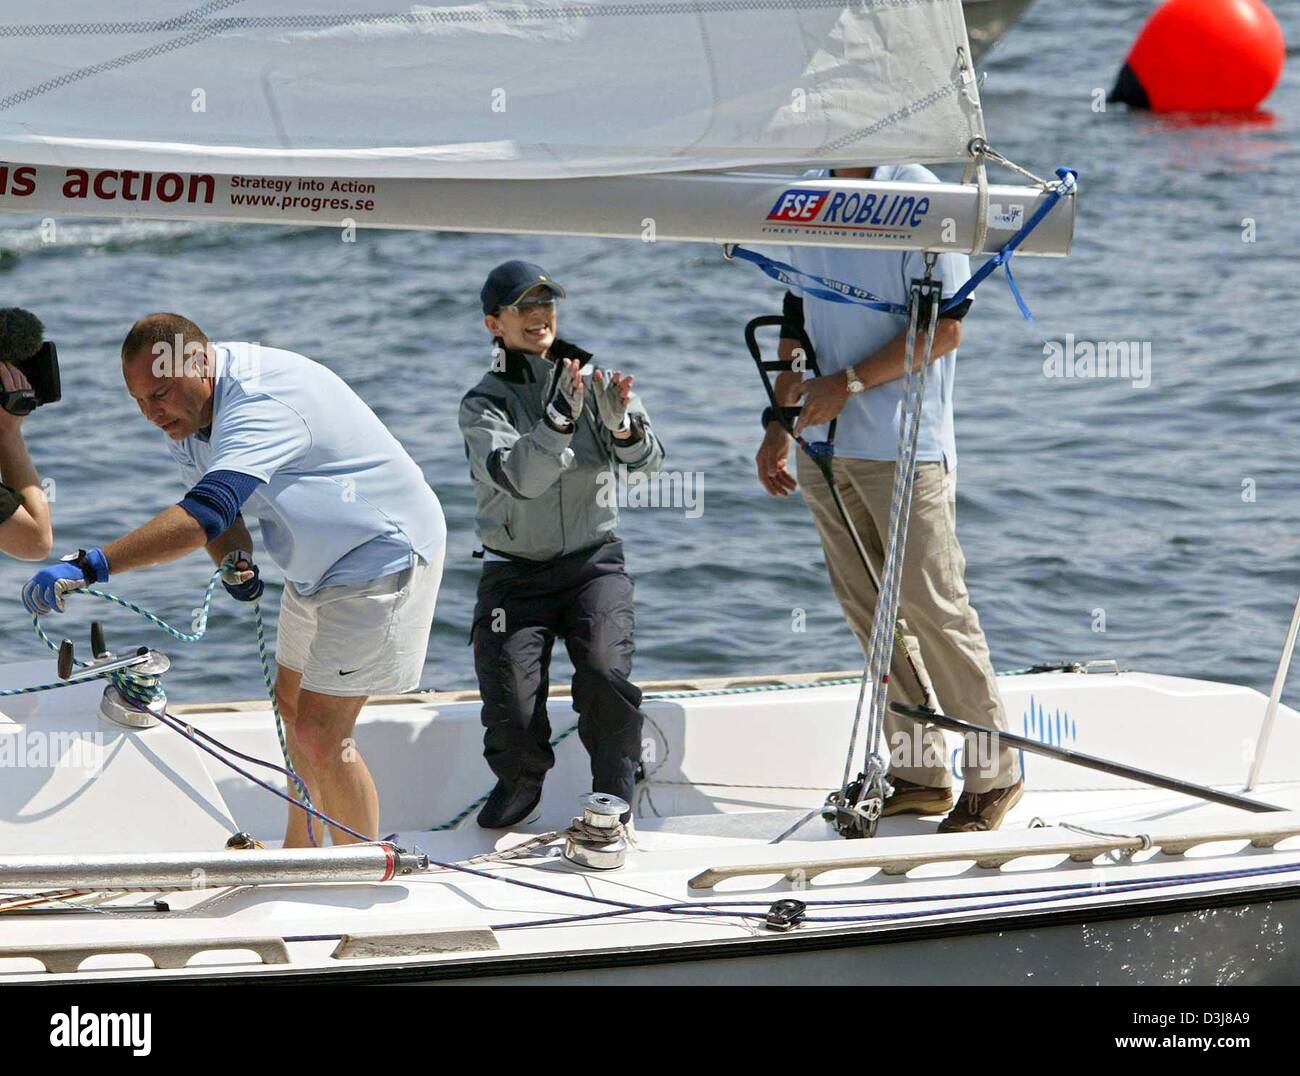 (dpa) - Mary Donaldson (C), fiancee of  Crown prince Frederik of Denmark, smiles and gestures as she sails with her crew during a sailing regatta in the harbour of Copenhagen, Denmark, 9 May 2004. Mary and Frederik were competing with each other in a sailing regatta which was eventually won by Mary. Stock Photo